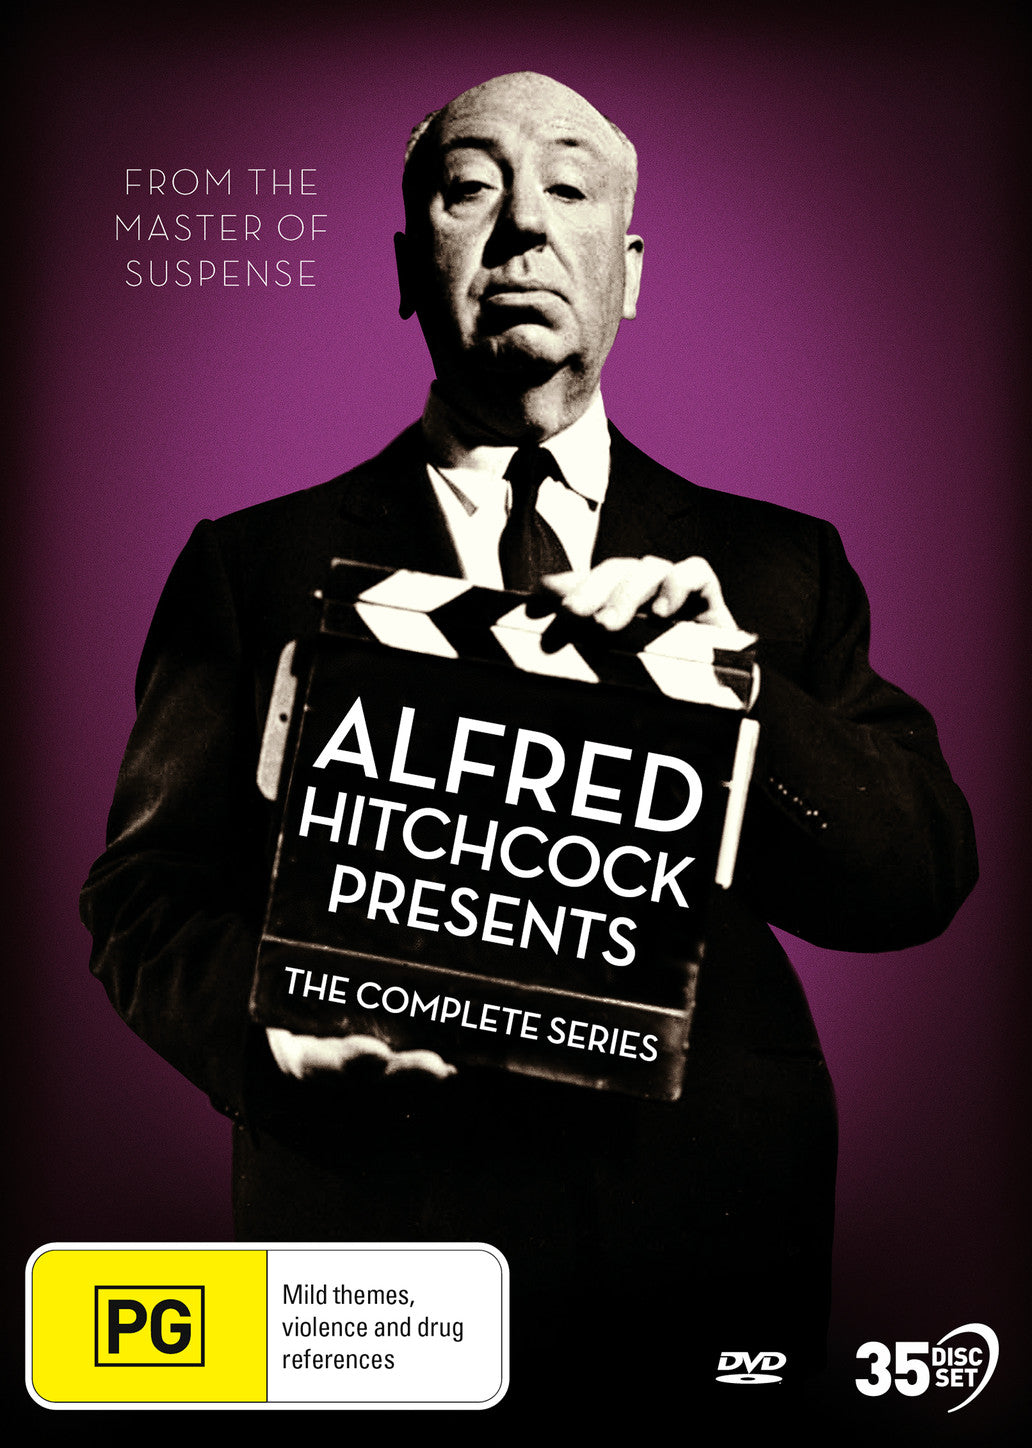 ALFRED HITCHCOCK PRESENTS: THE COMPLETE SERIES